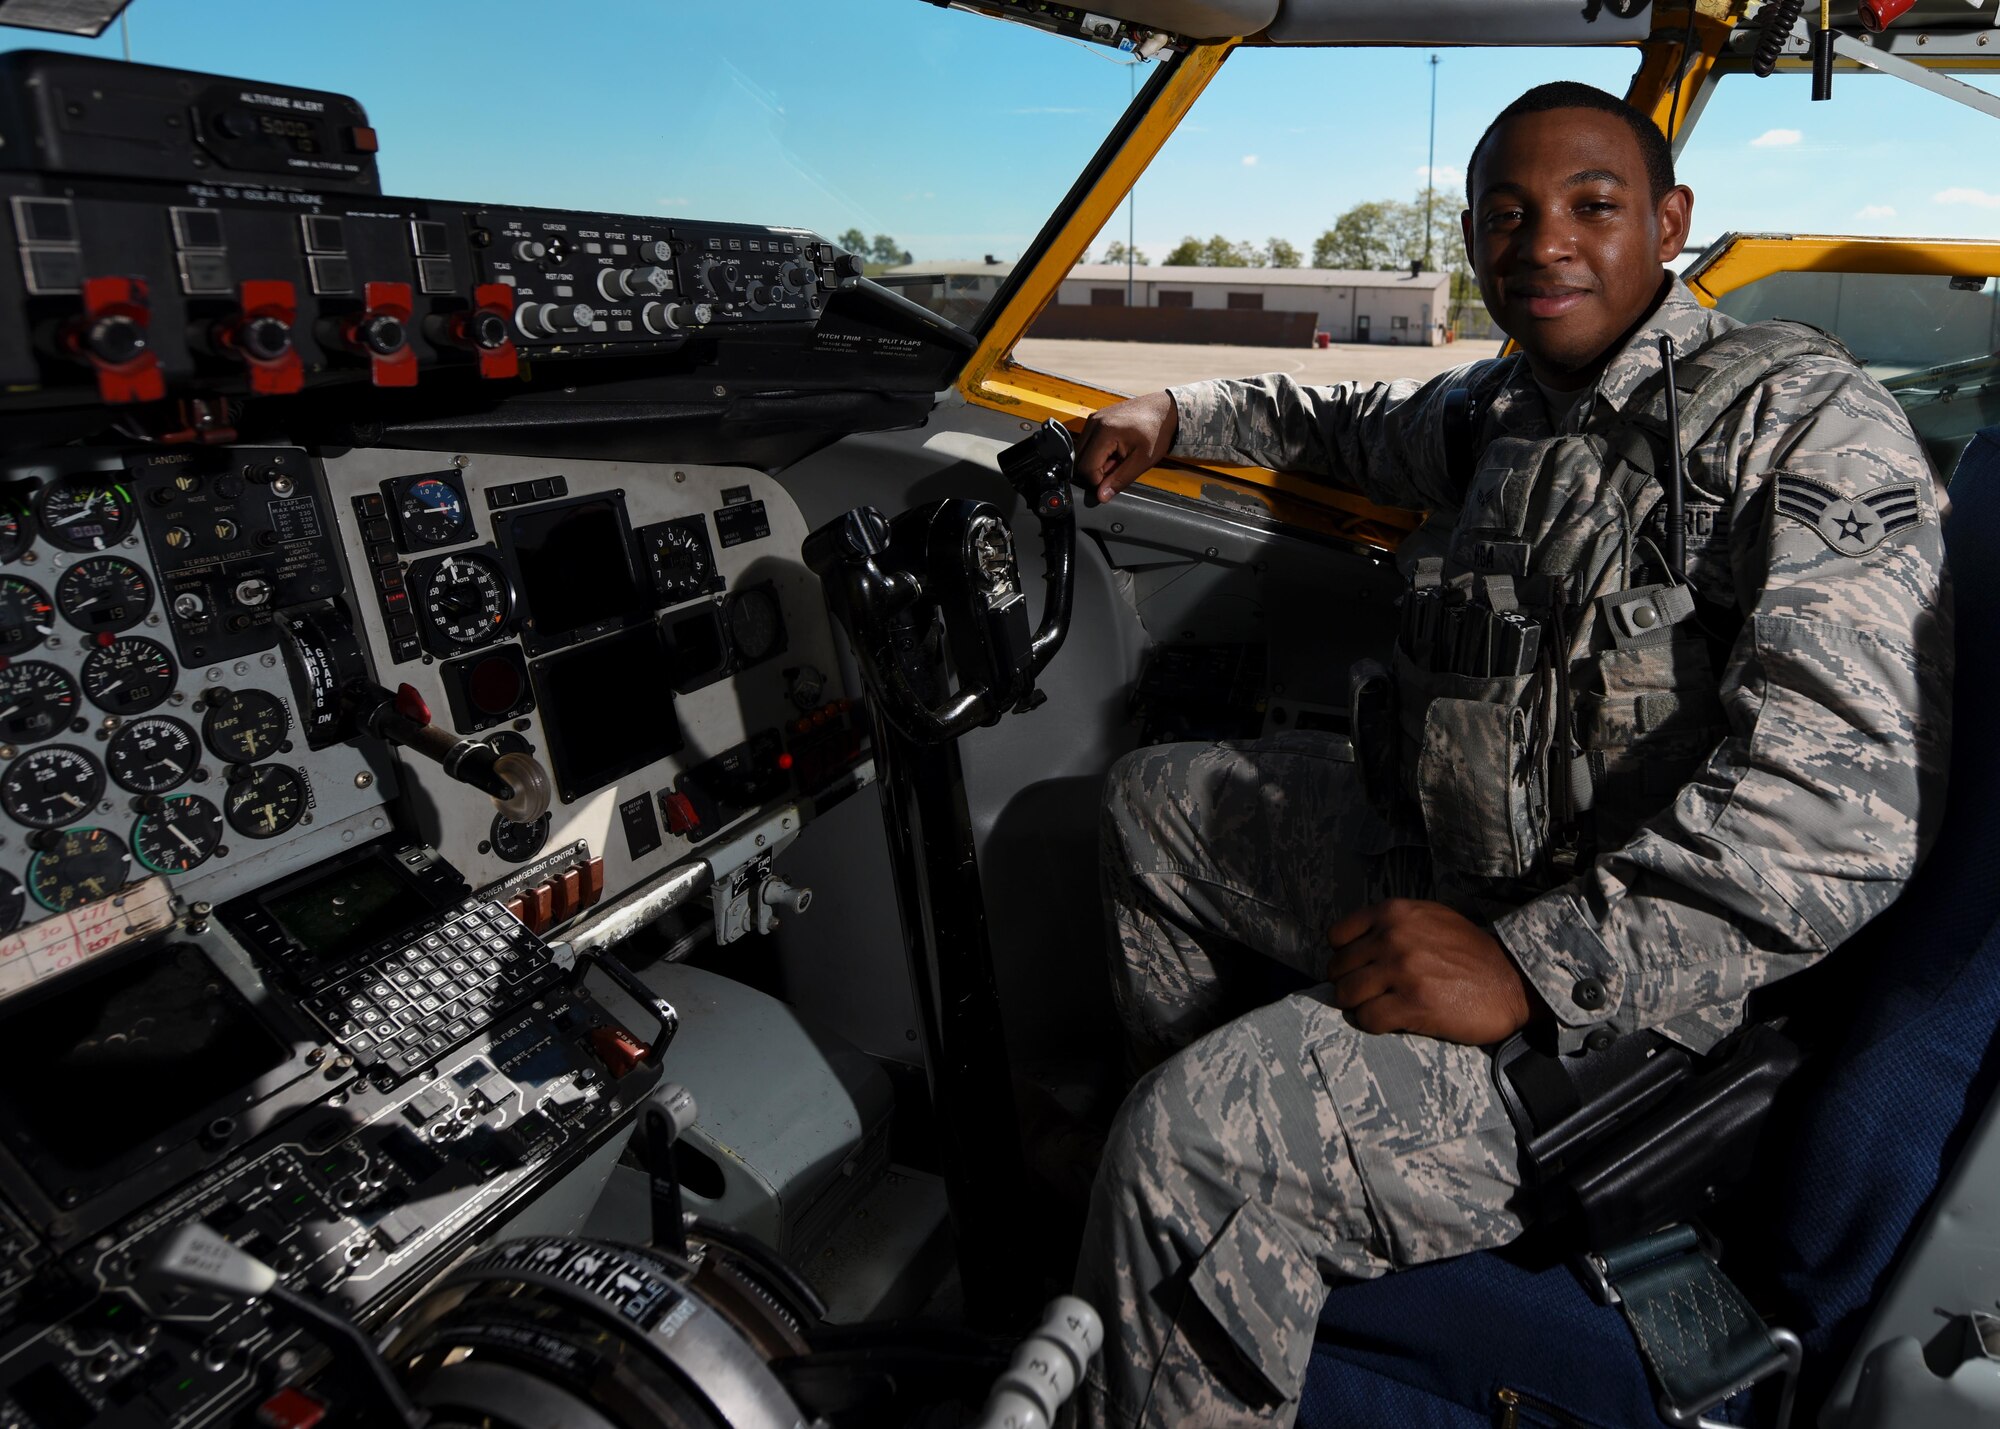 Senior Airman Demetrio V. Vega, stationed at the 171st Air Refueling Wing located near Pittsburgh Pennsylvania poses in cockpit of a KC-135 Tanker